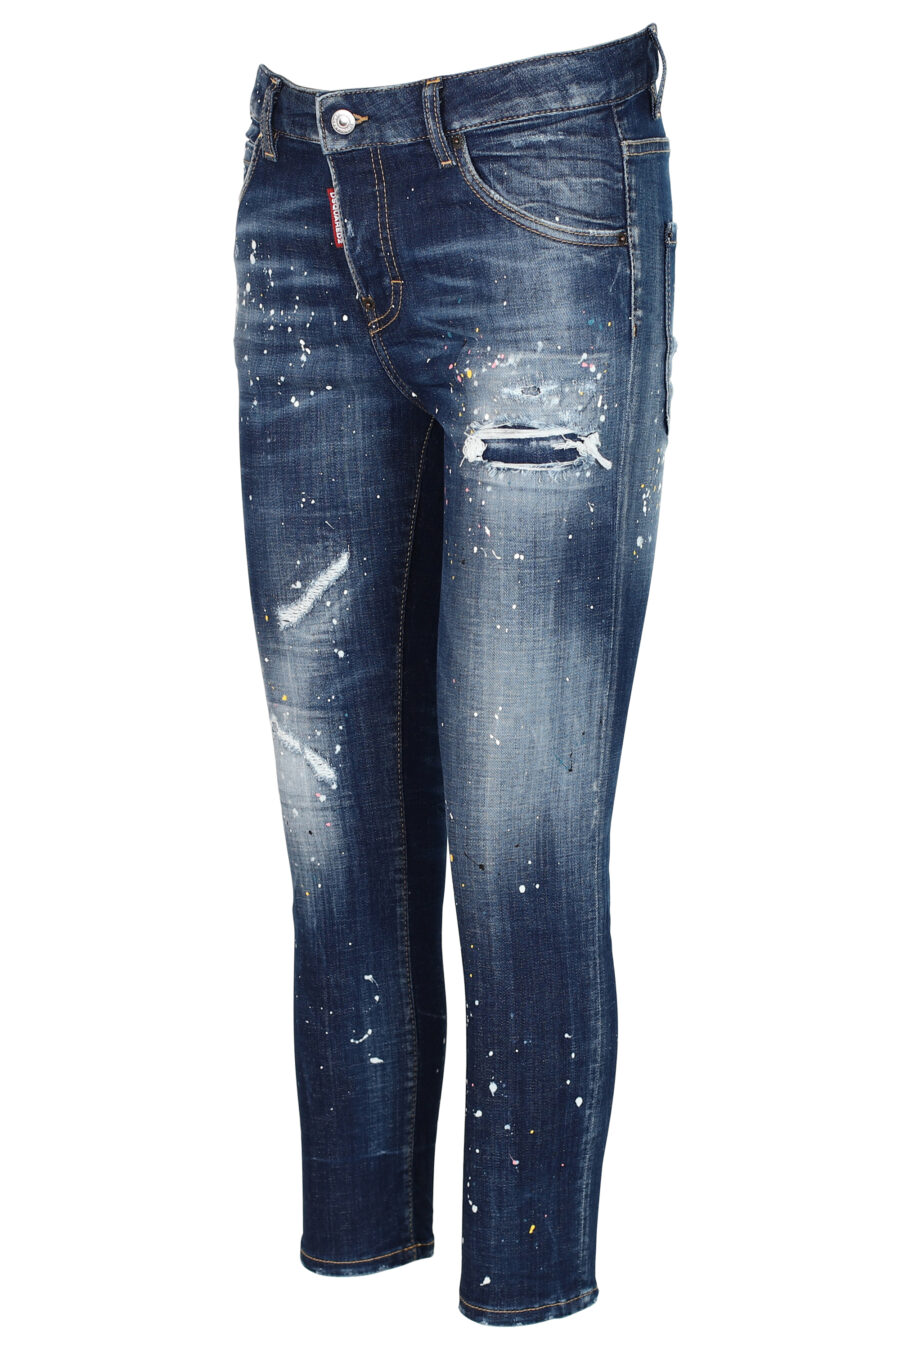 Cool girl cropped jean trousers "Cool girl cropped jean" blue worn with rips - 8052134942512 2